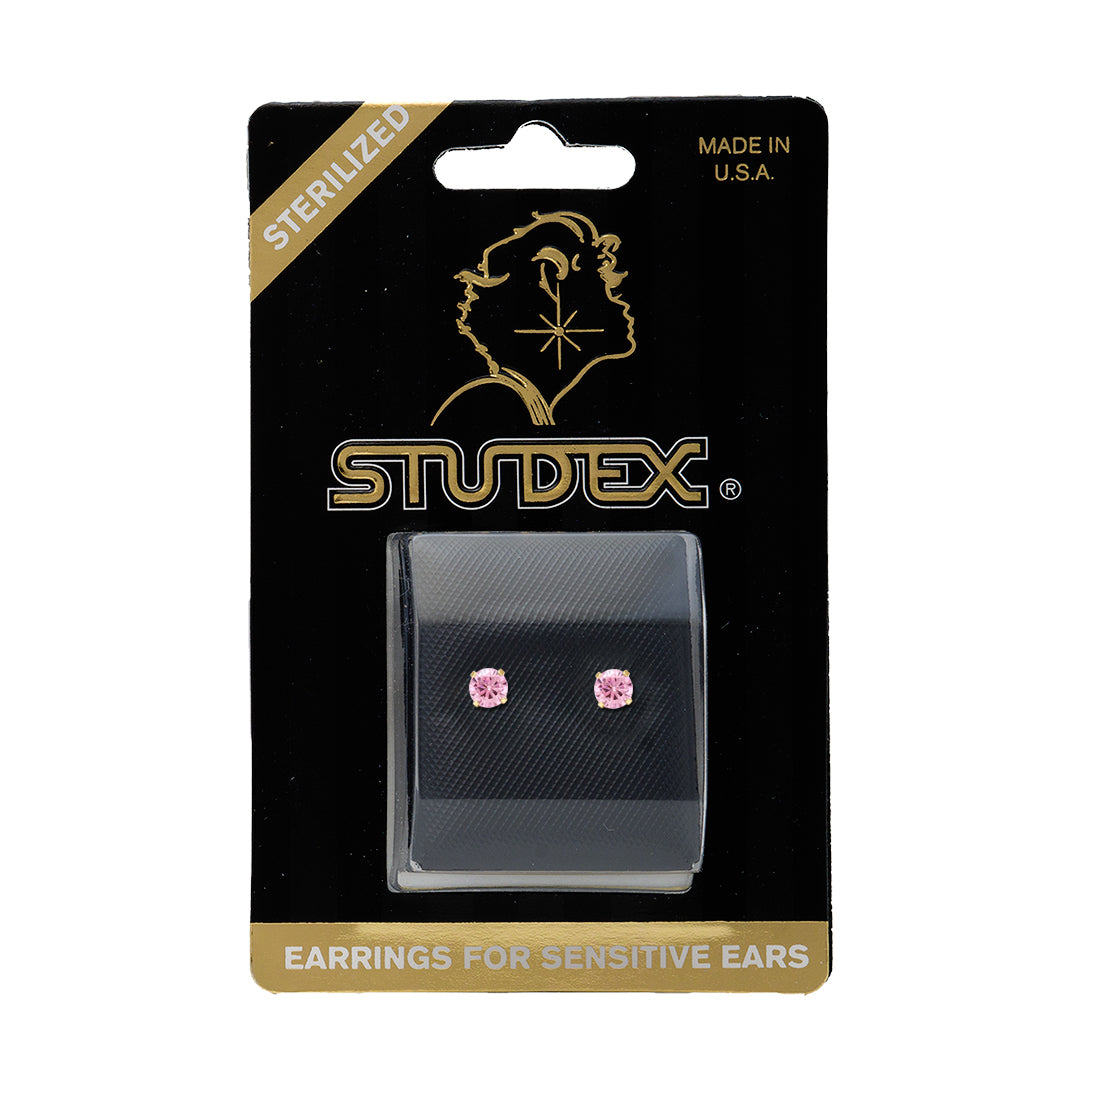 5MM Cubic Zirconia Pink 24K Pure Gold Plated Ear Studs | Ideal for everyday wear